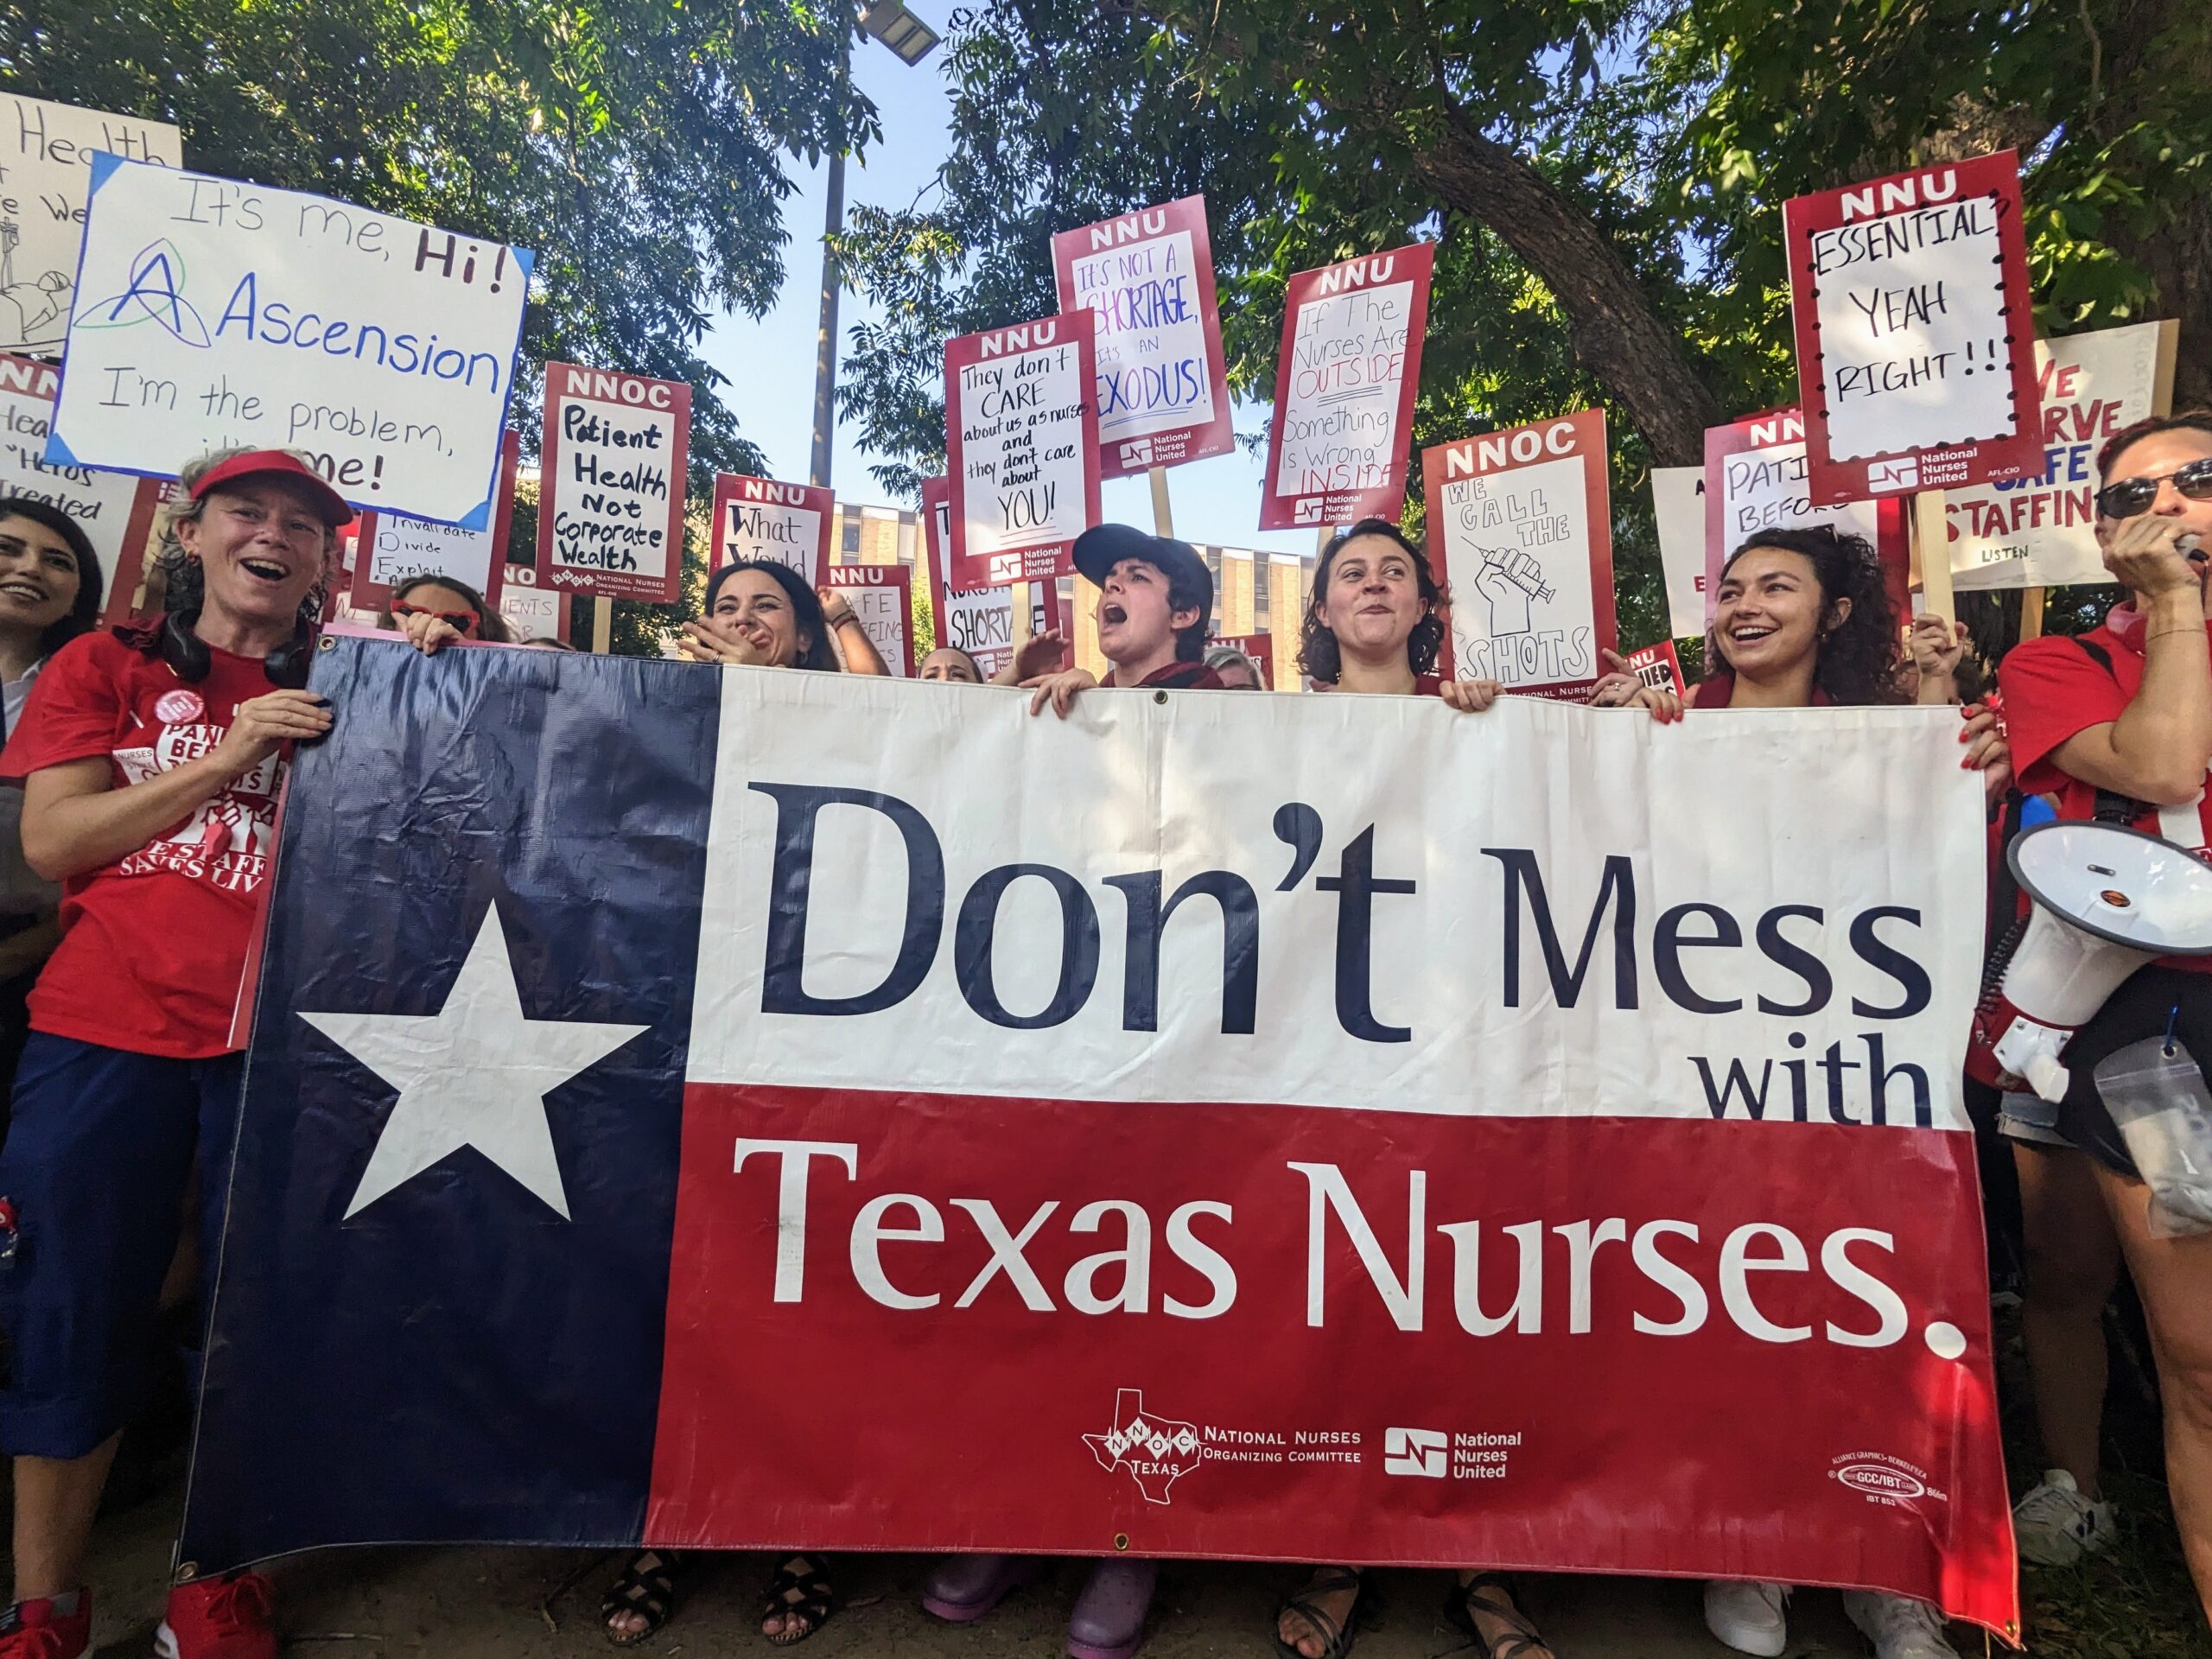 A group if striking nurses hold National Nurses United strike signs and a large banner designed with the Texas flag and the words Don't Mess with Texas Nurses.